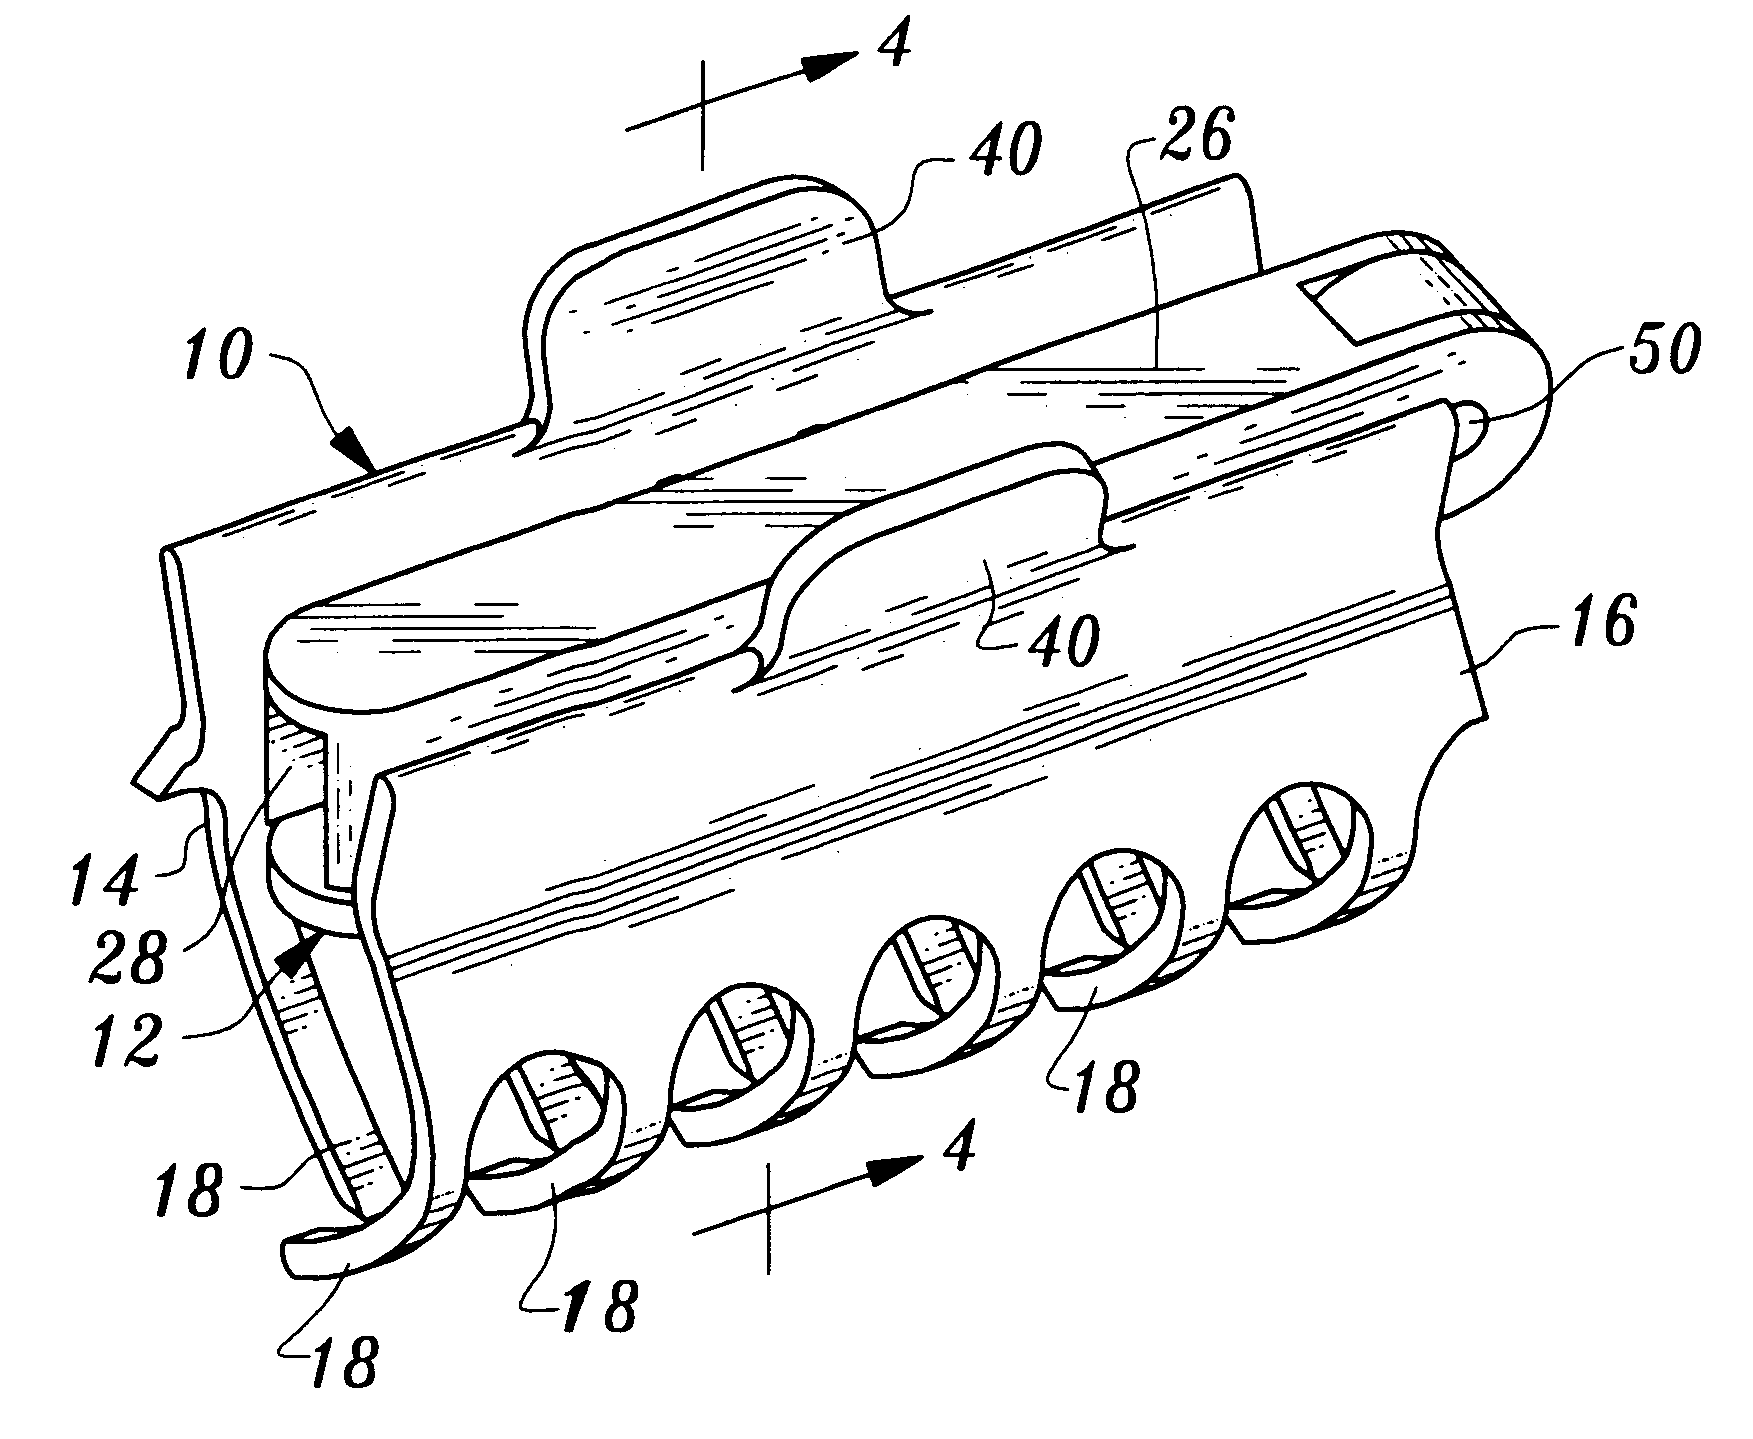 Apparatus for grooming and decorating hair